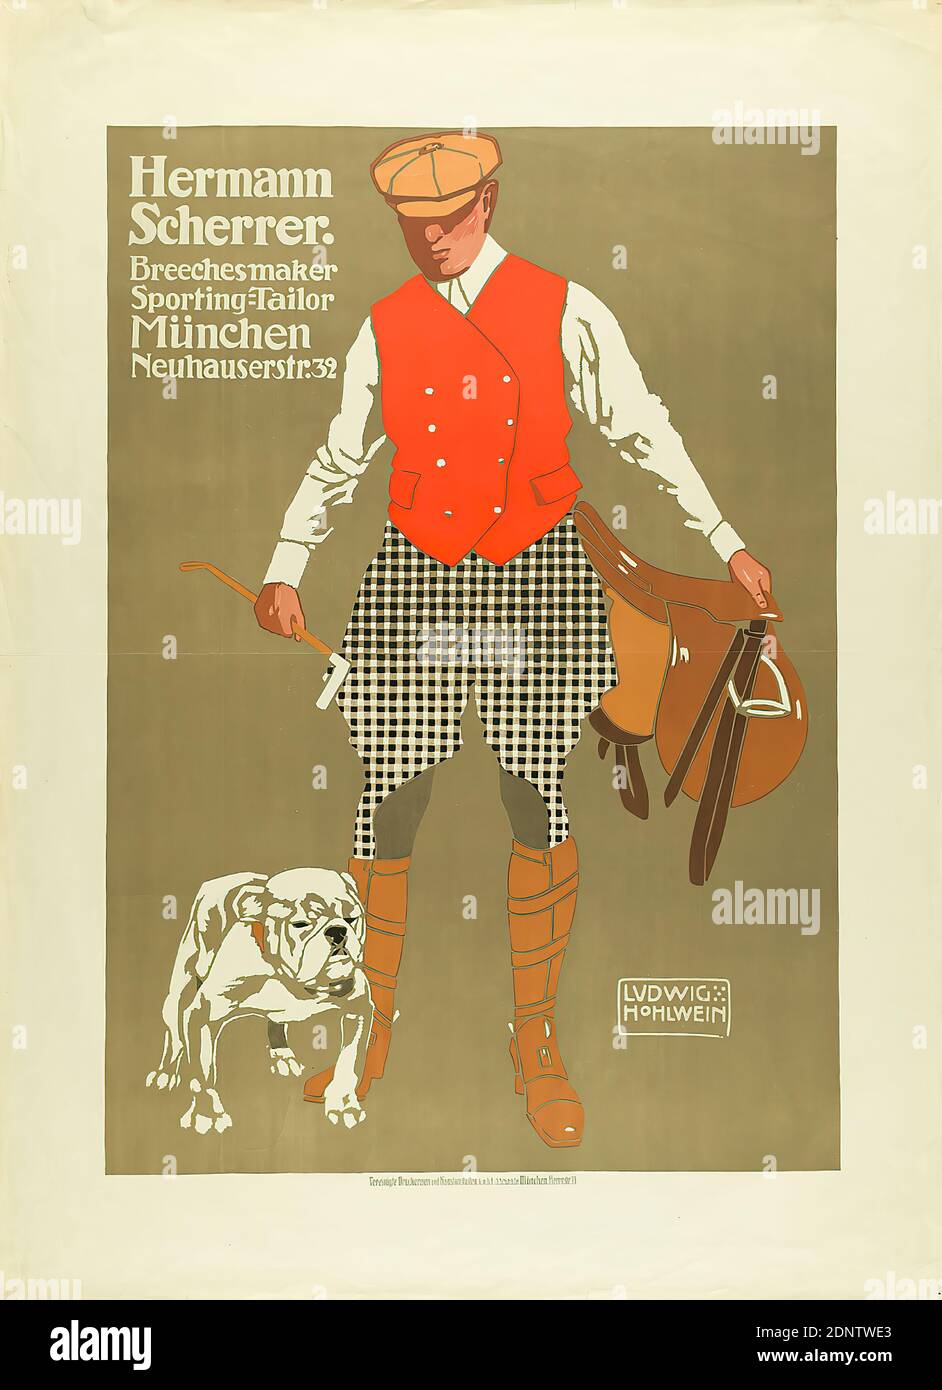 G. Schuh & Cie. (Munich), Ludwig Hohlwein, Hermann Scherrer. Breechesmaker Sporting-Tailor Munich, paper, lithograph, total: height: 125 cm; width: 91 cm, signed and inscribed: u. r. in the printing plate: LUDWIG HOHLWEIN, product and business advertising (posters), man, rider, saddle and bridle, dog, men's fashion, advertising, advertisement, art nouveau Stock Photo